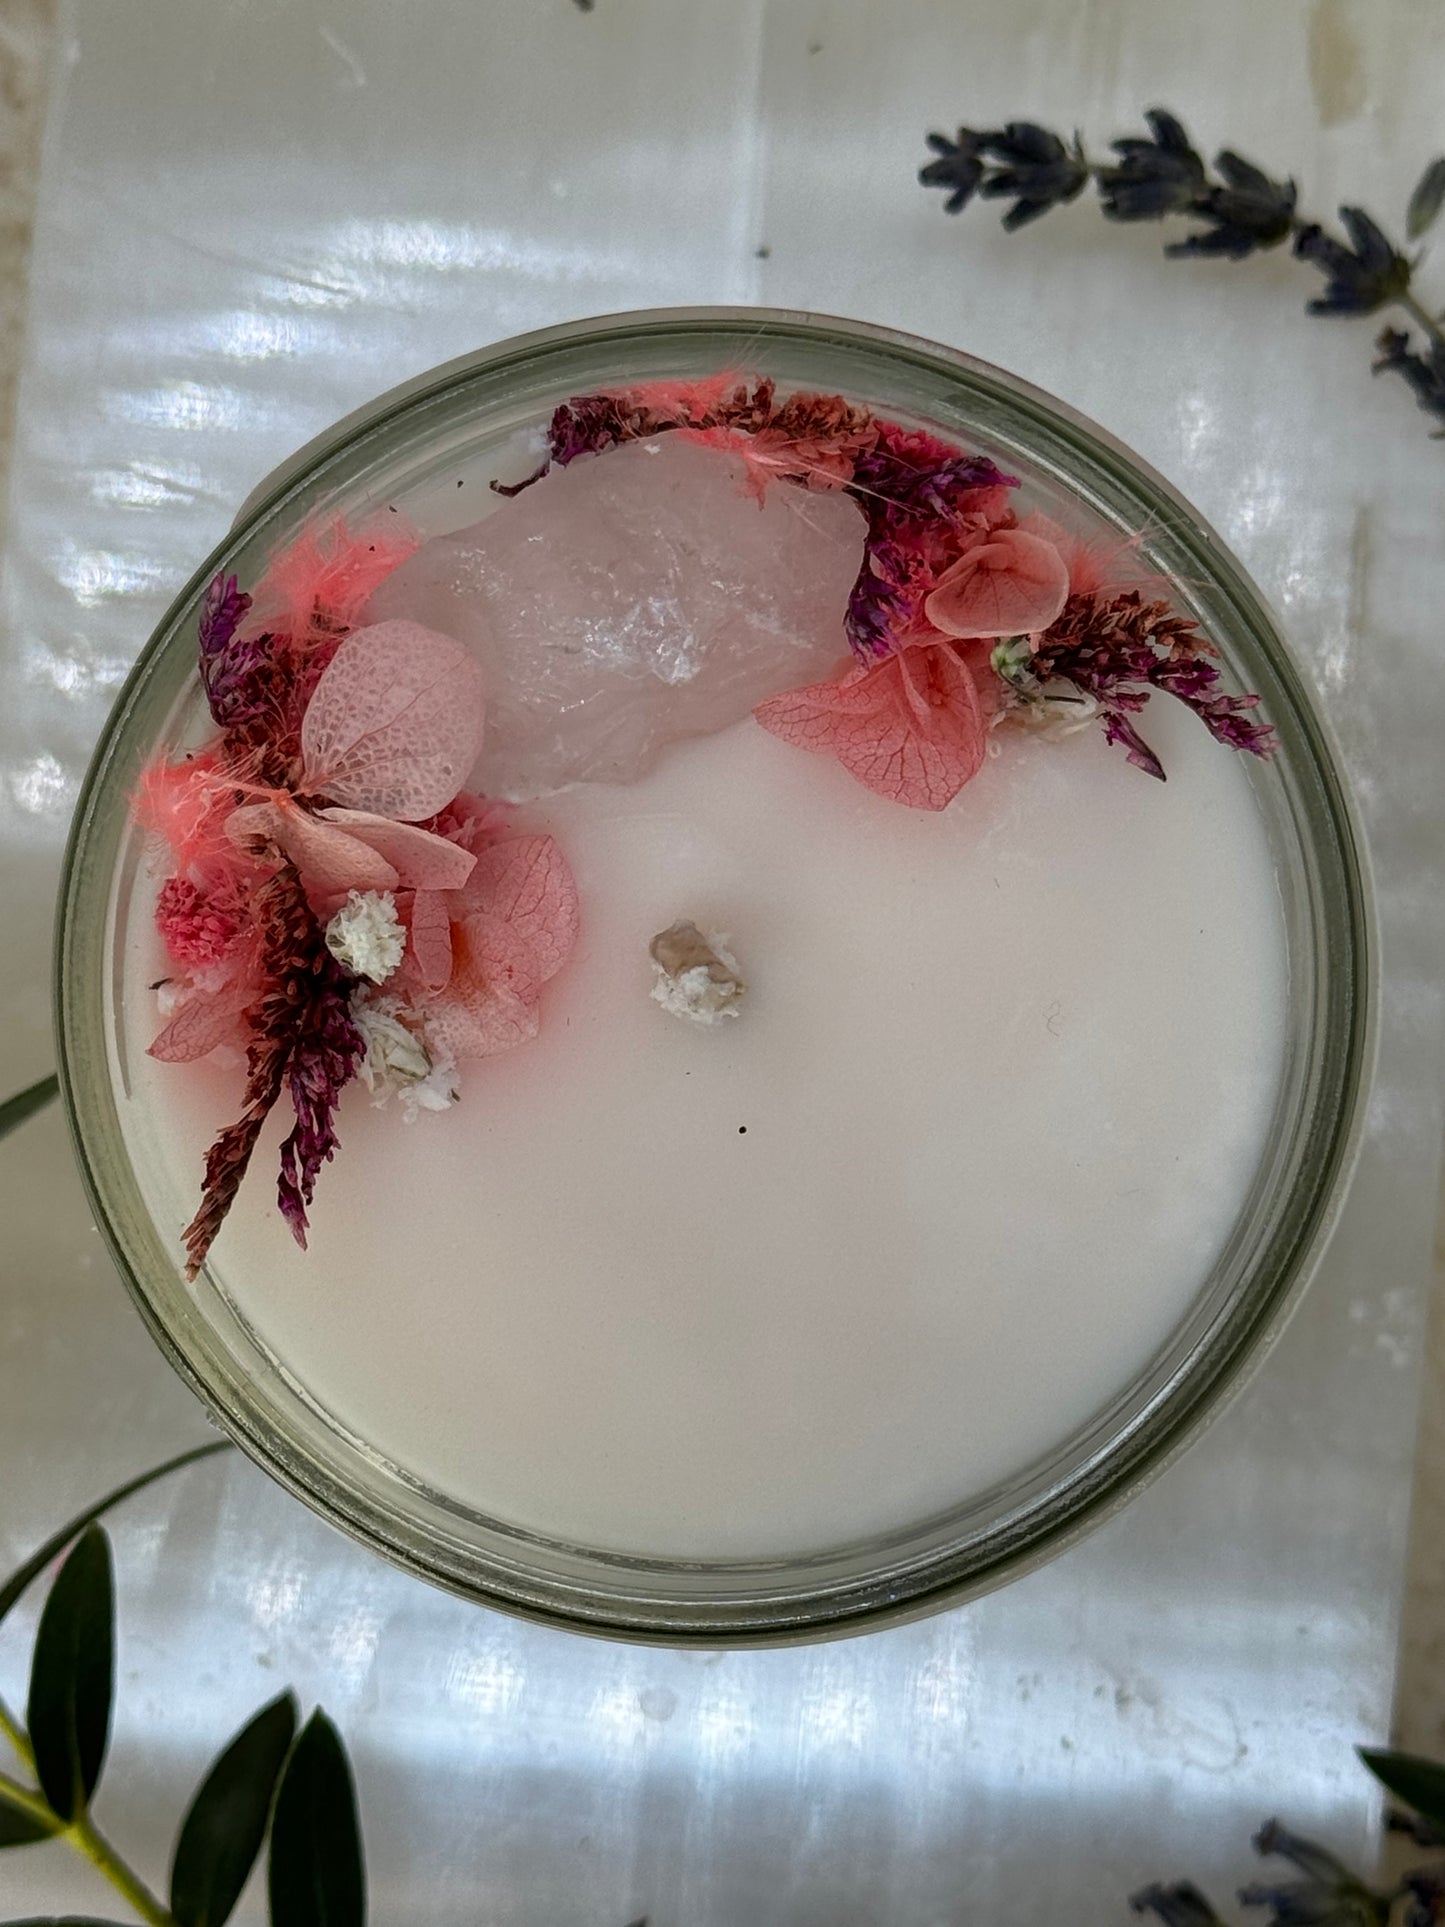 Rose Quartz ~ "Stone of Love" Soy Candle~ Japanese Cherry Blossom